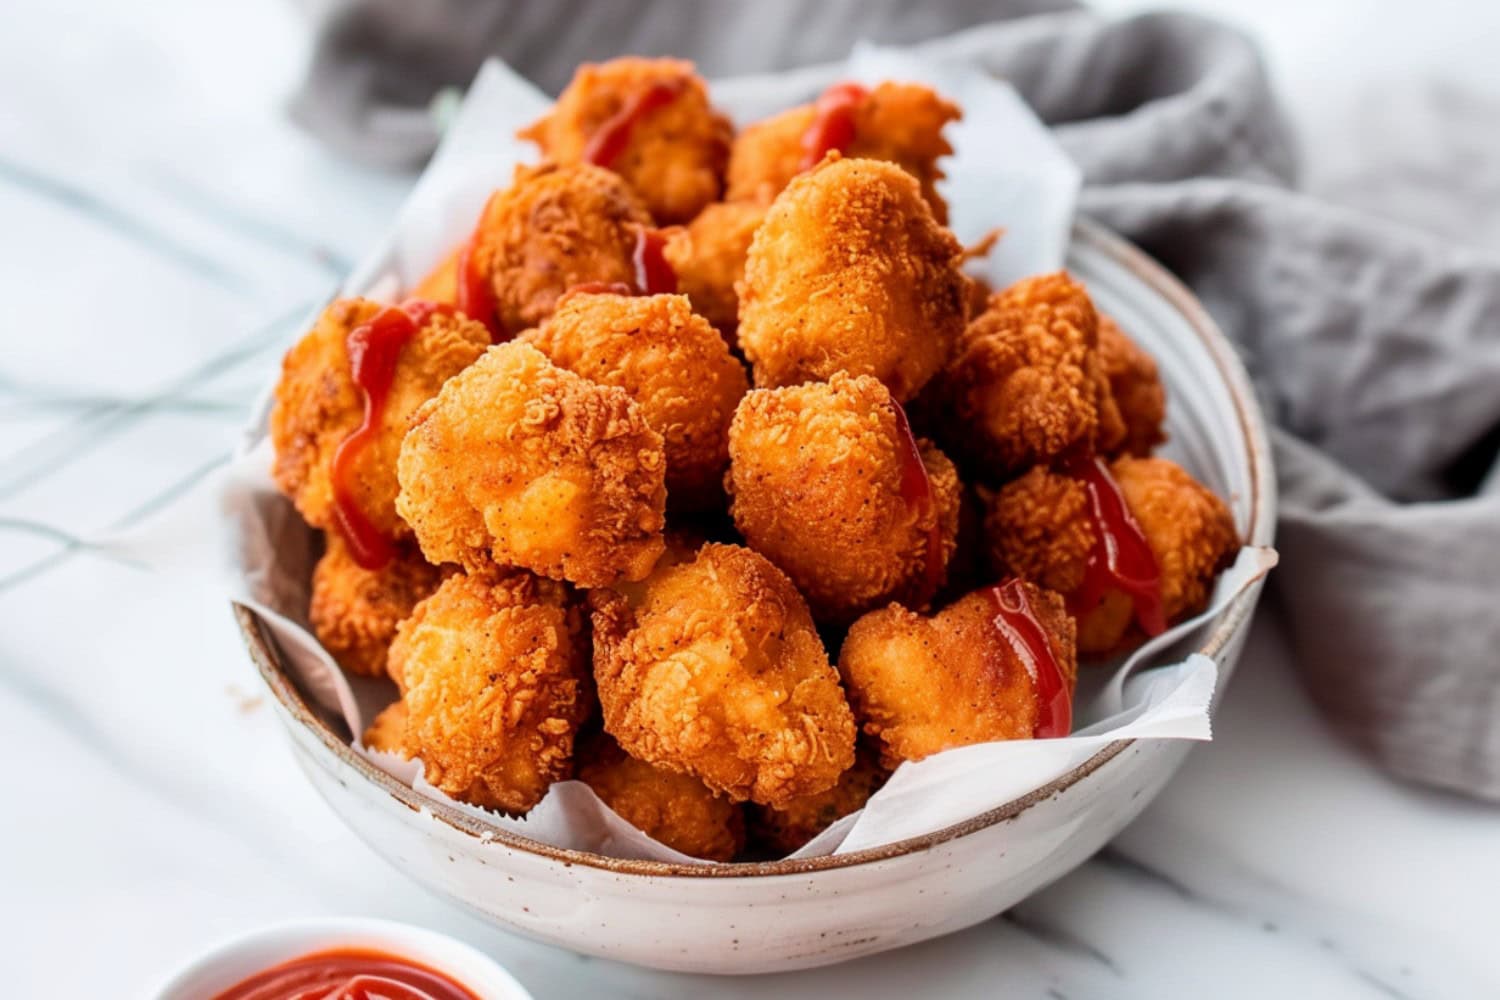 Golden nuggets of popcorn chicken, crunchy on the outside and juicy on the inside